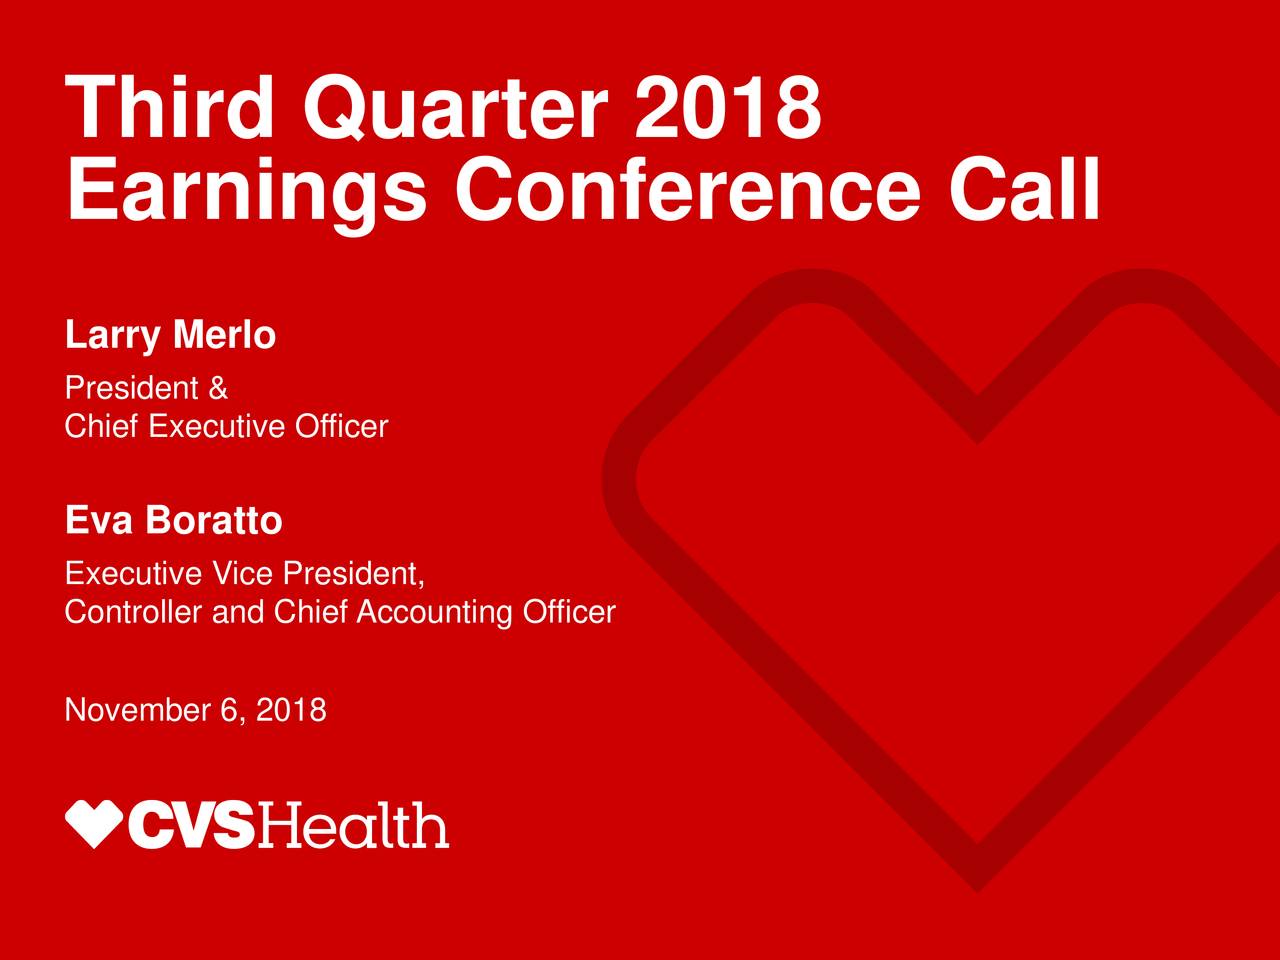 Earnings Conference Call Larry Merlo President & Chief Executive Officer Eva Boratto Executive Vice President, Controller and Chief Accounting Officer November 6, 2018